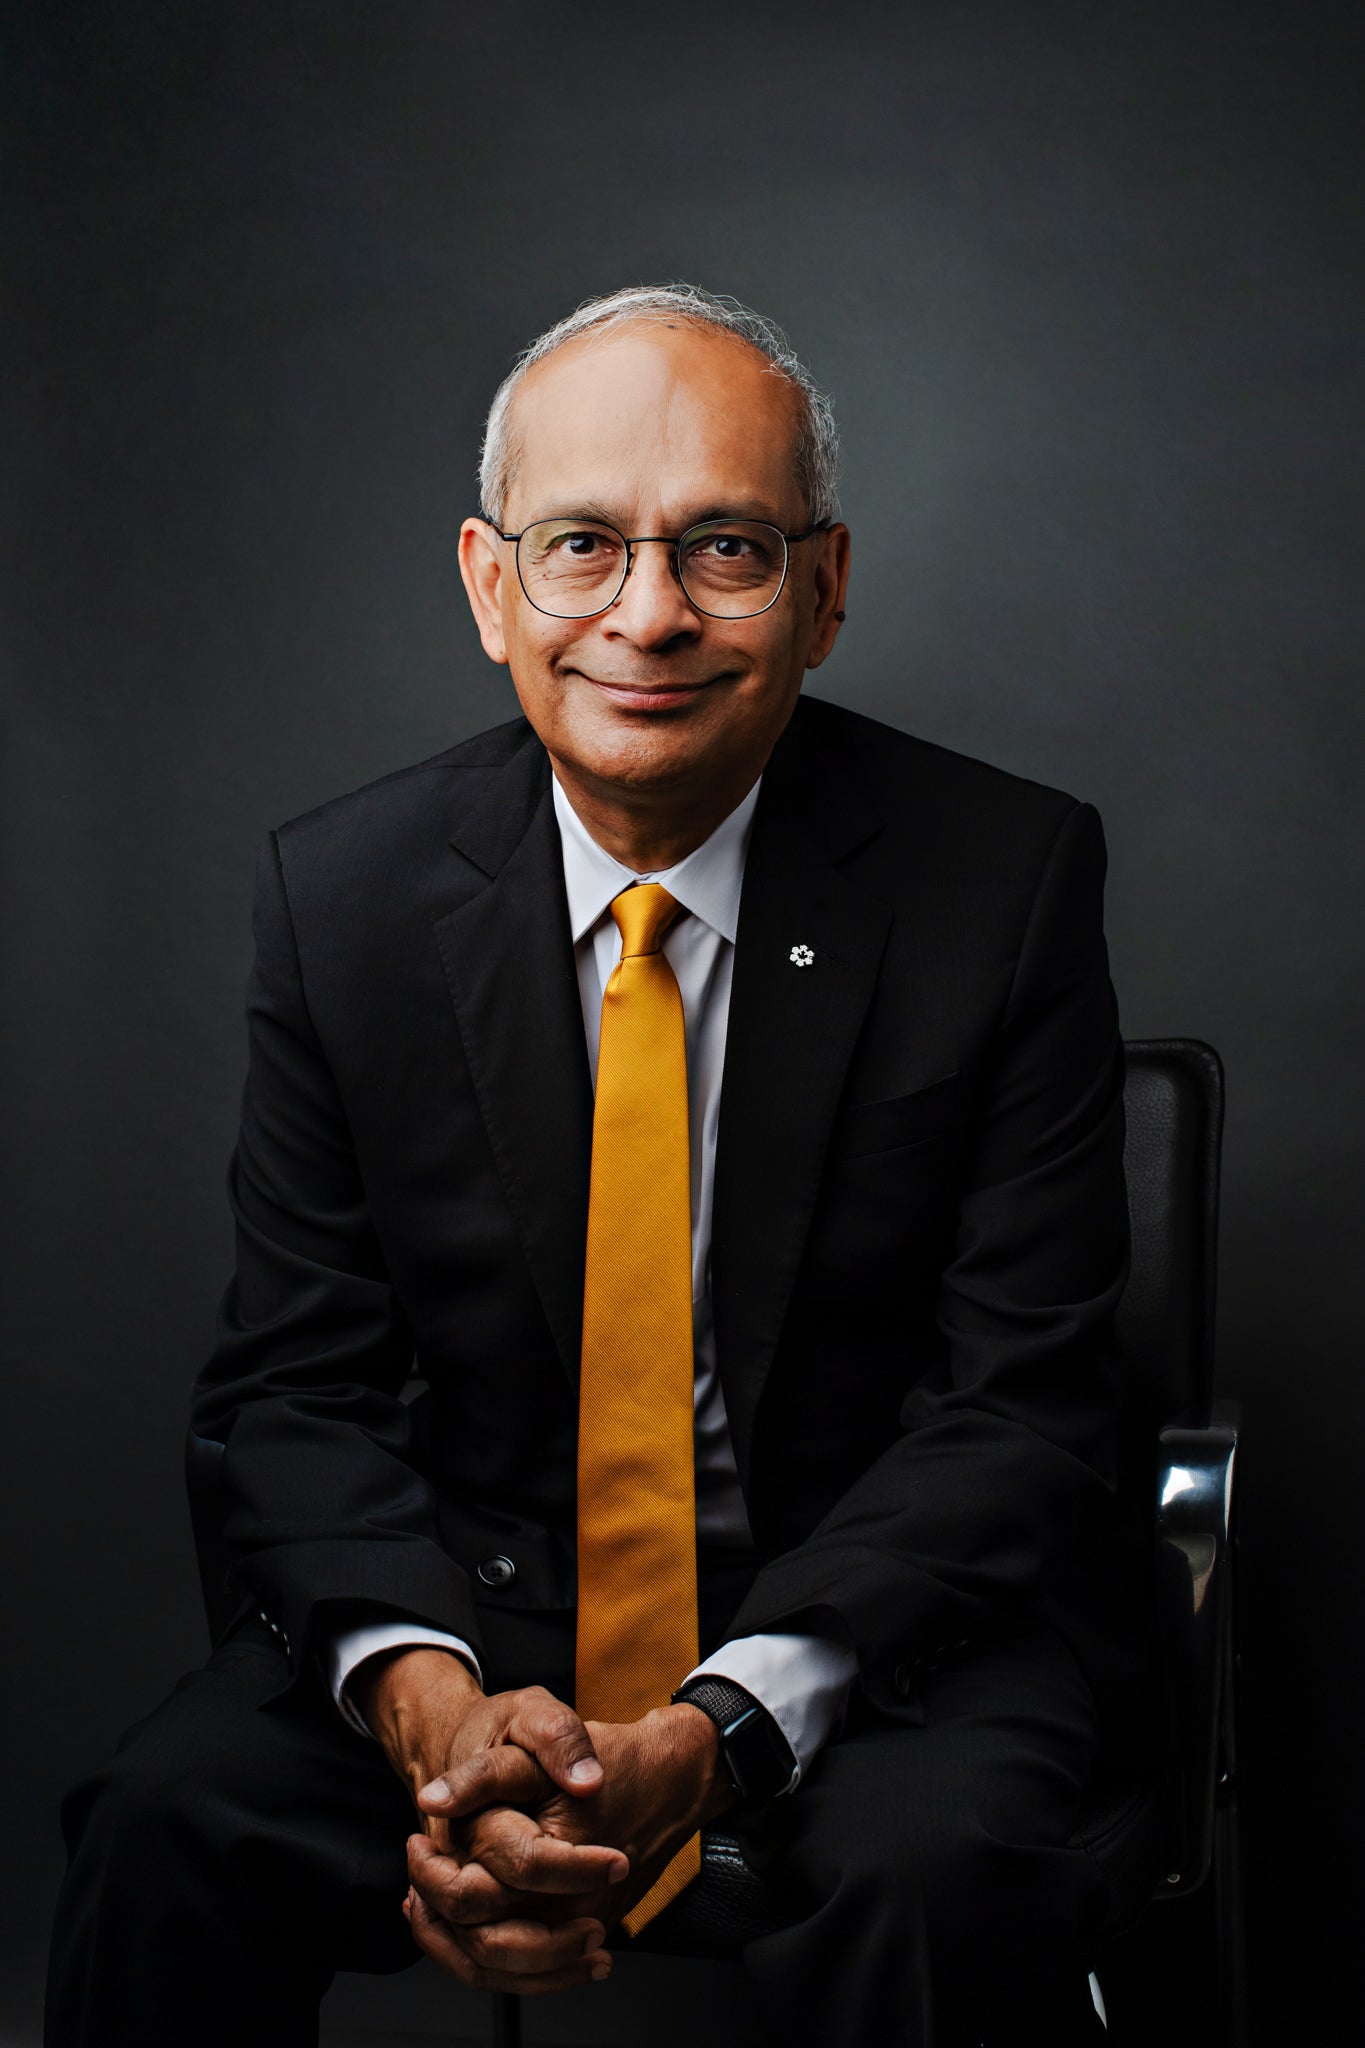 Vivek Goel seated with hands together smiling at camera